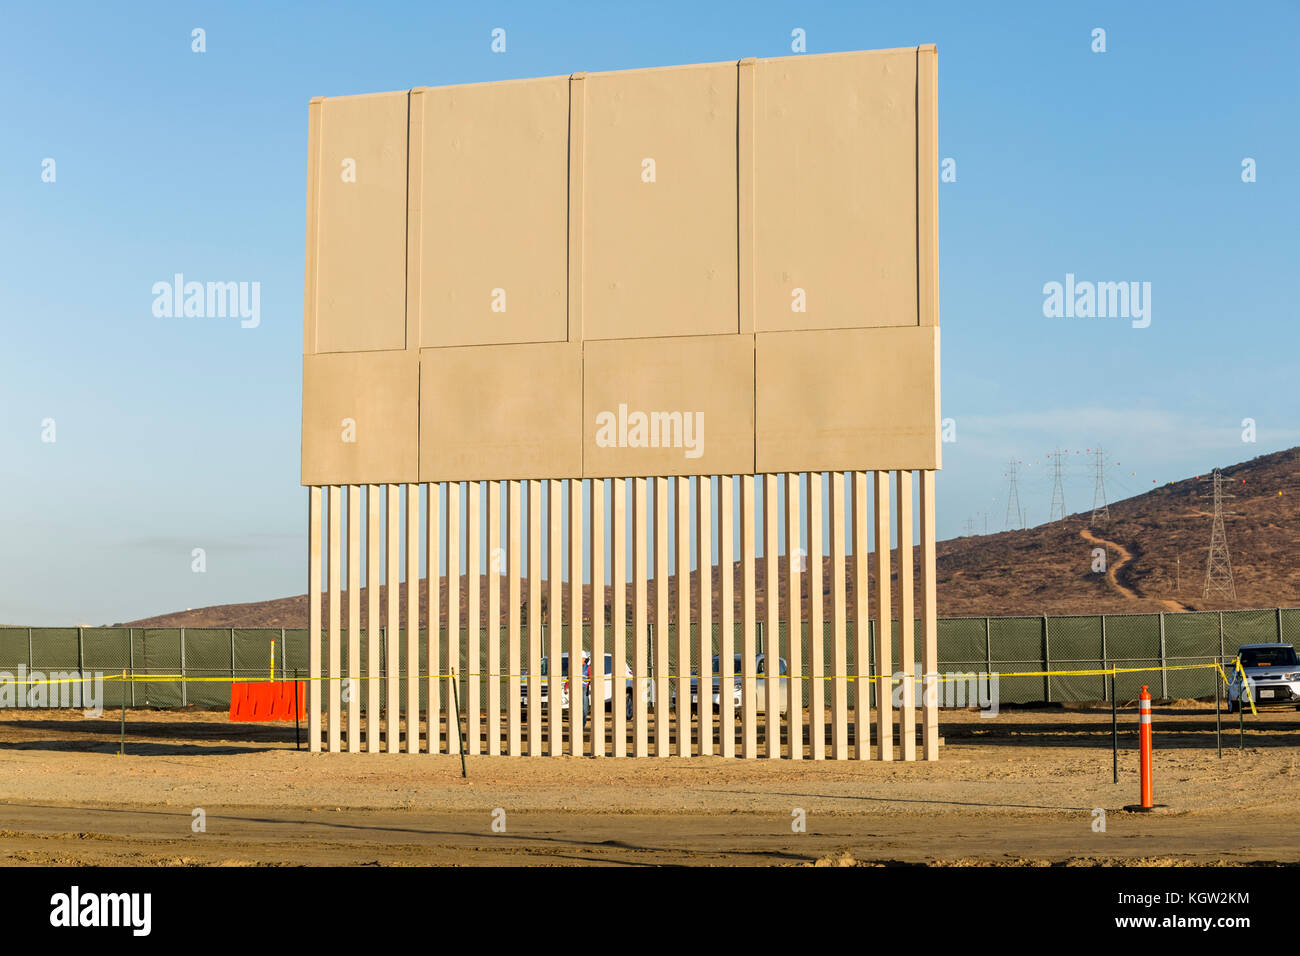 Trump administration new US-Mexico border wall prototypes are unveiled in October 2017. This prototype is one of 2 designed and built by Caddell Construction Co., an Arizona-based company and will be subjected to testing to ensure they can withstand attack and attempts to go through, under and over them. See more information below. Stock Photo